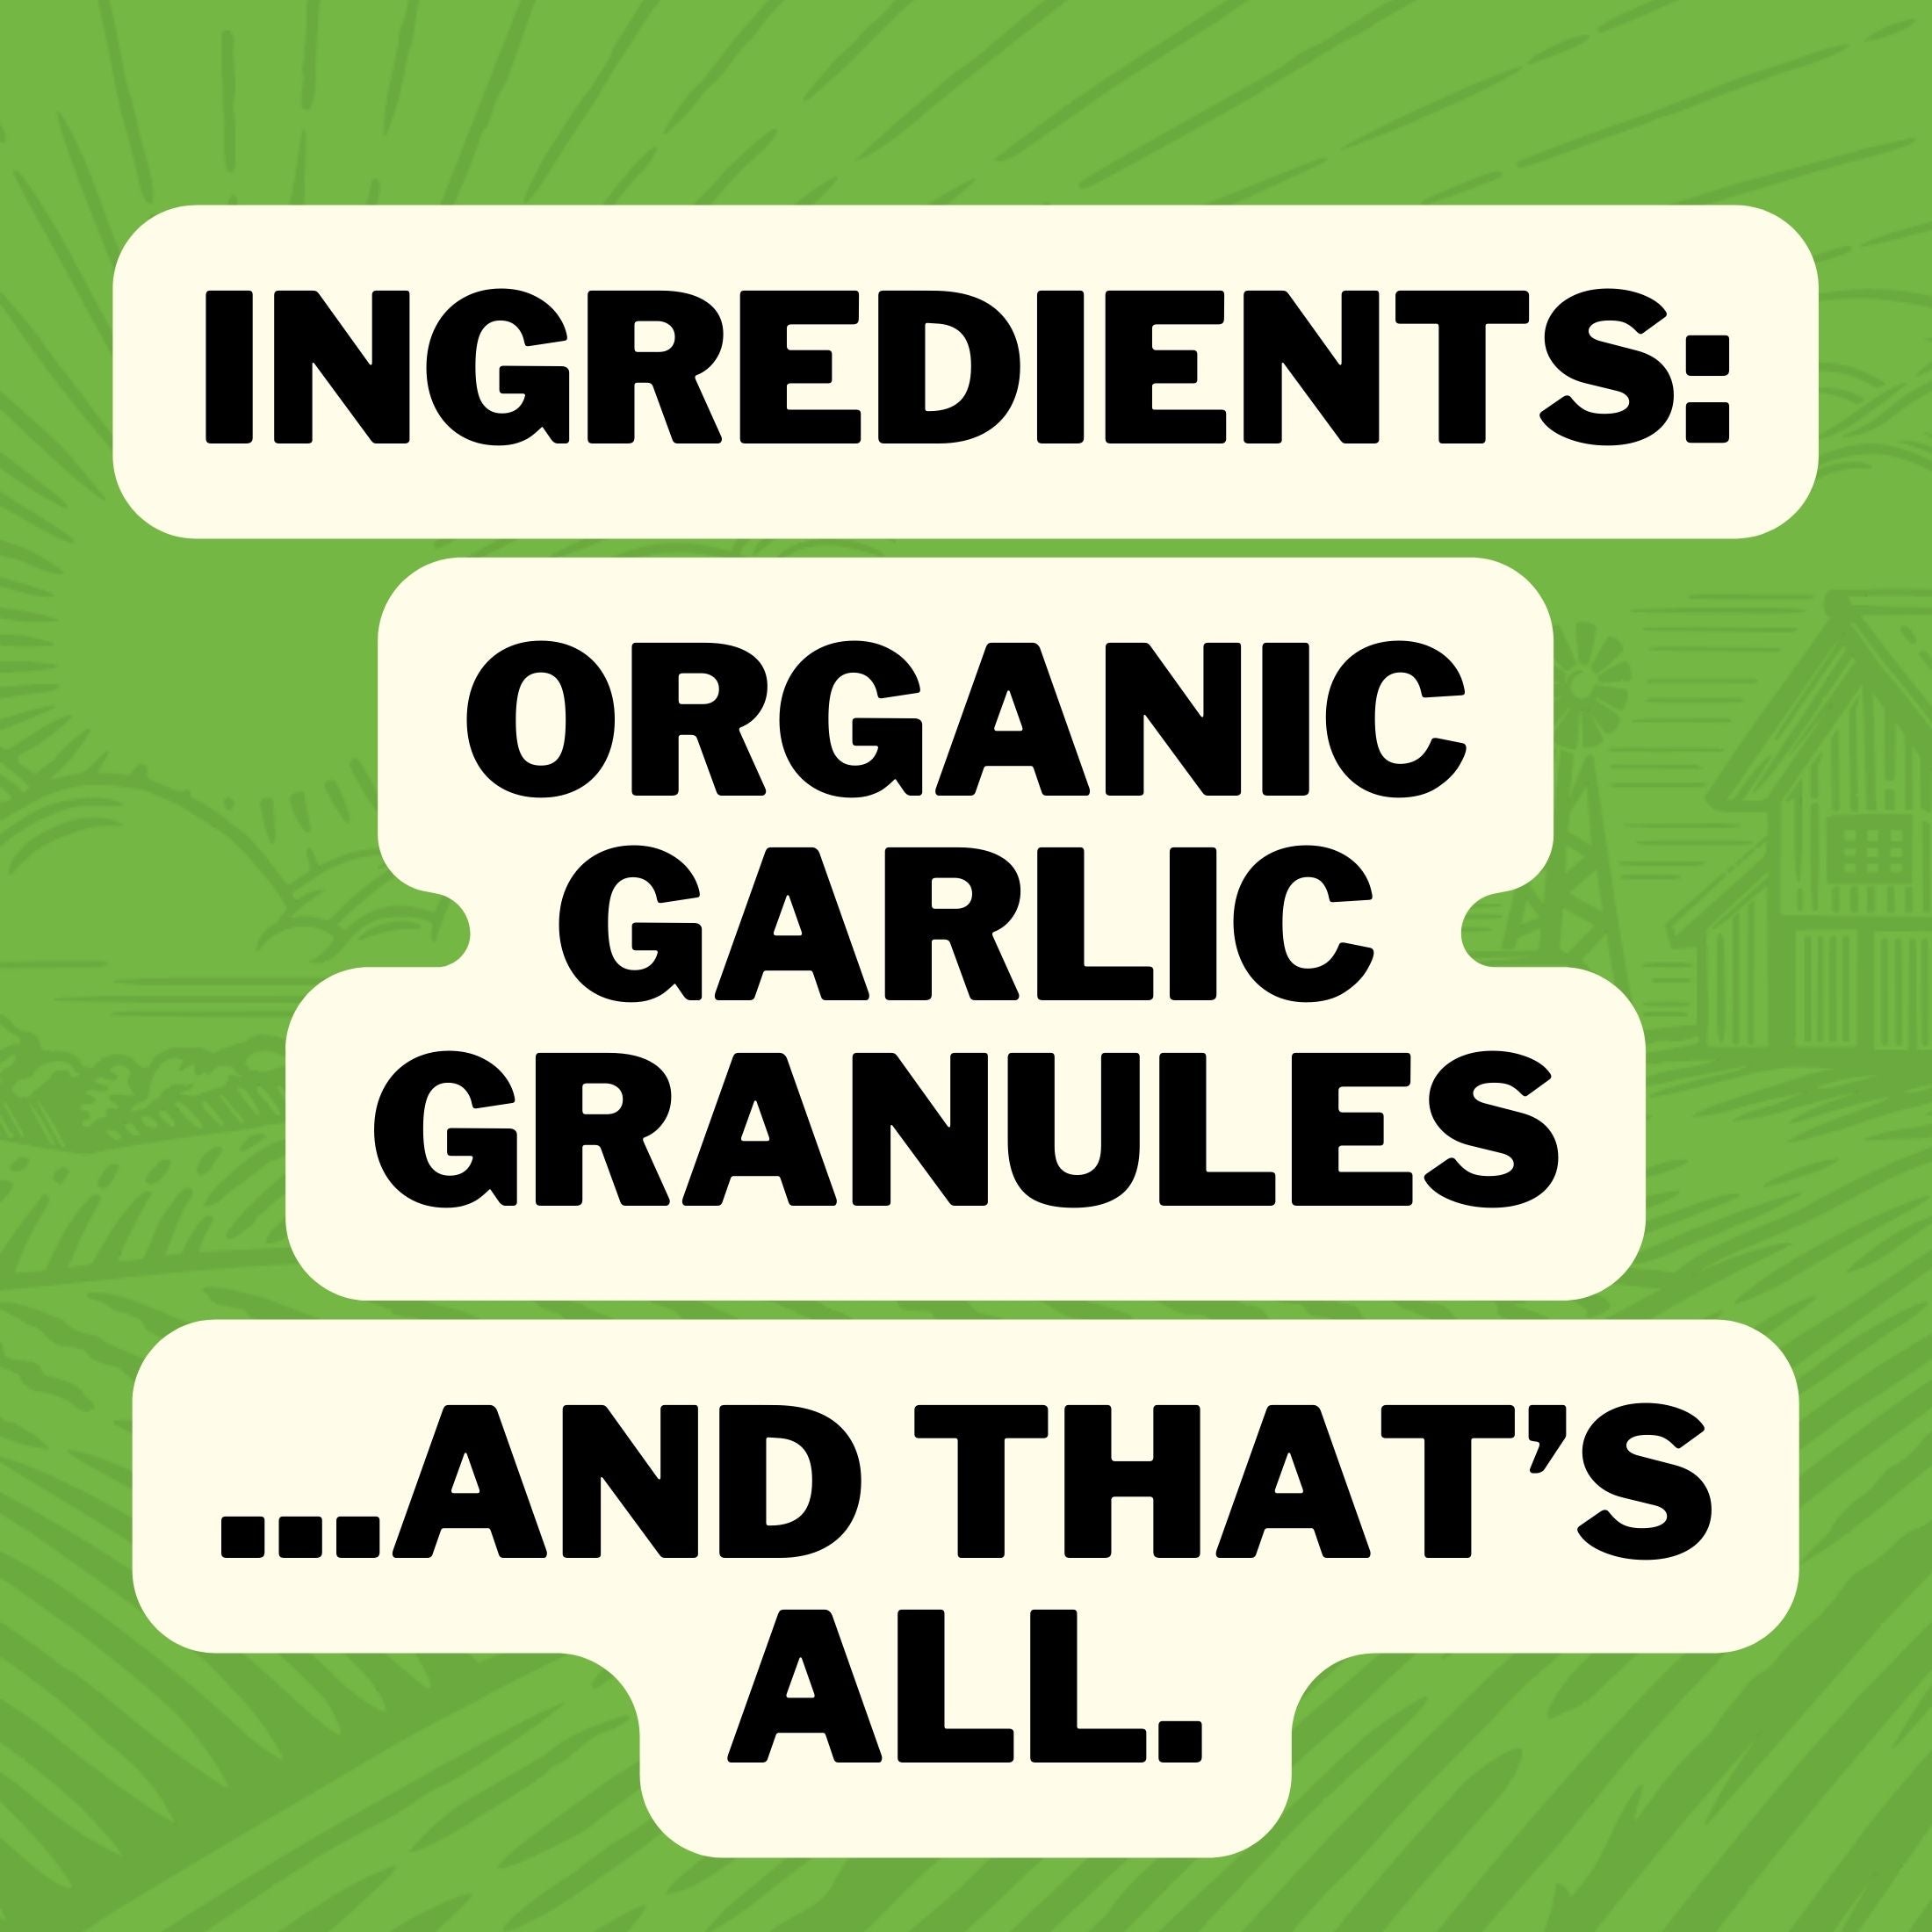 Ingredients: Organic Garlic Granules ... And That's All